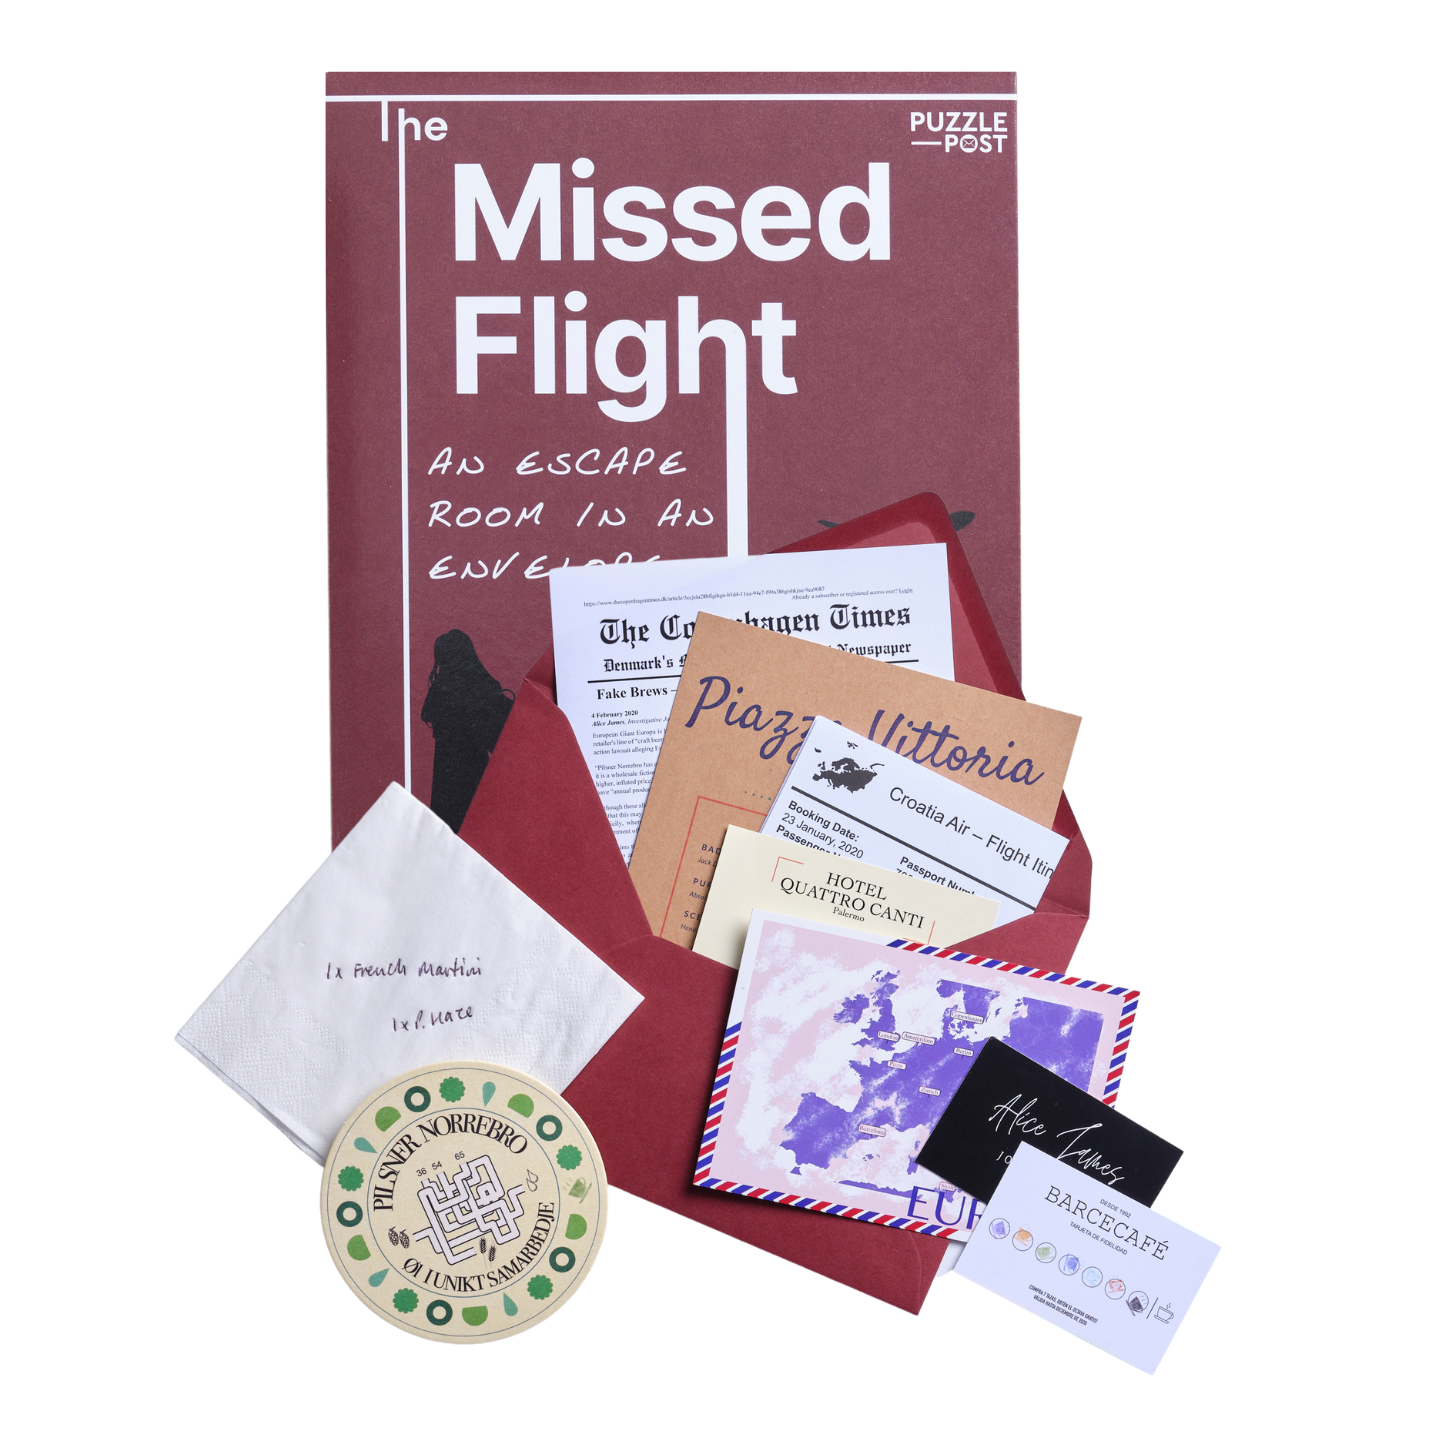 The Missed Flight: An Escape Room in an Envelope